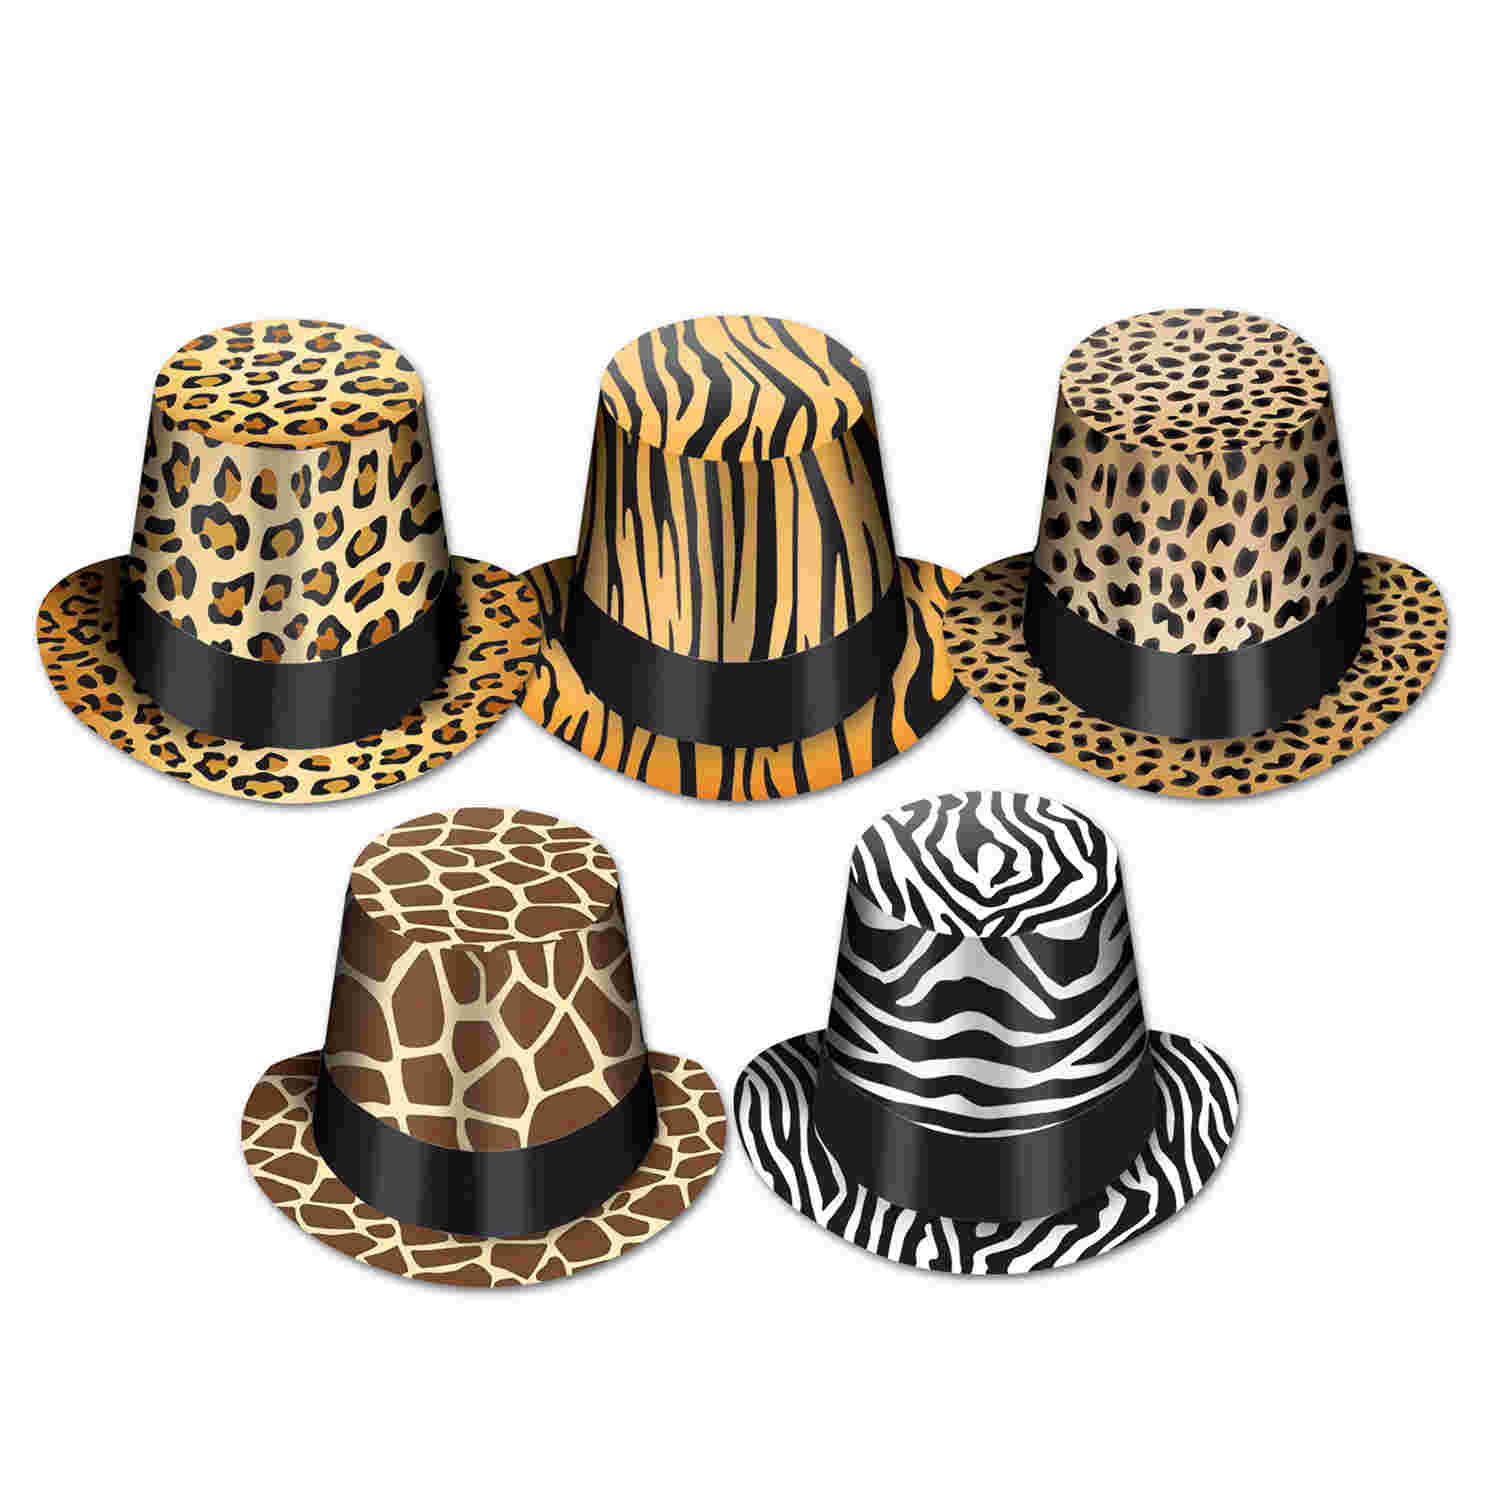 party hats with jungle printed designs on the such as zebra print and leopard print